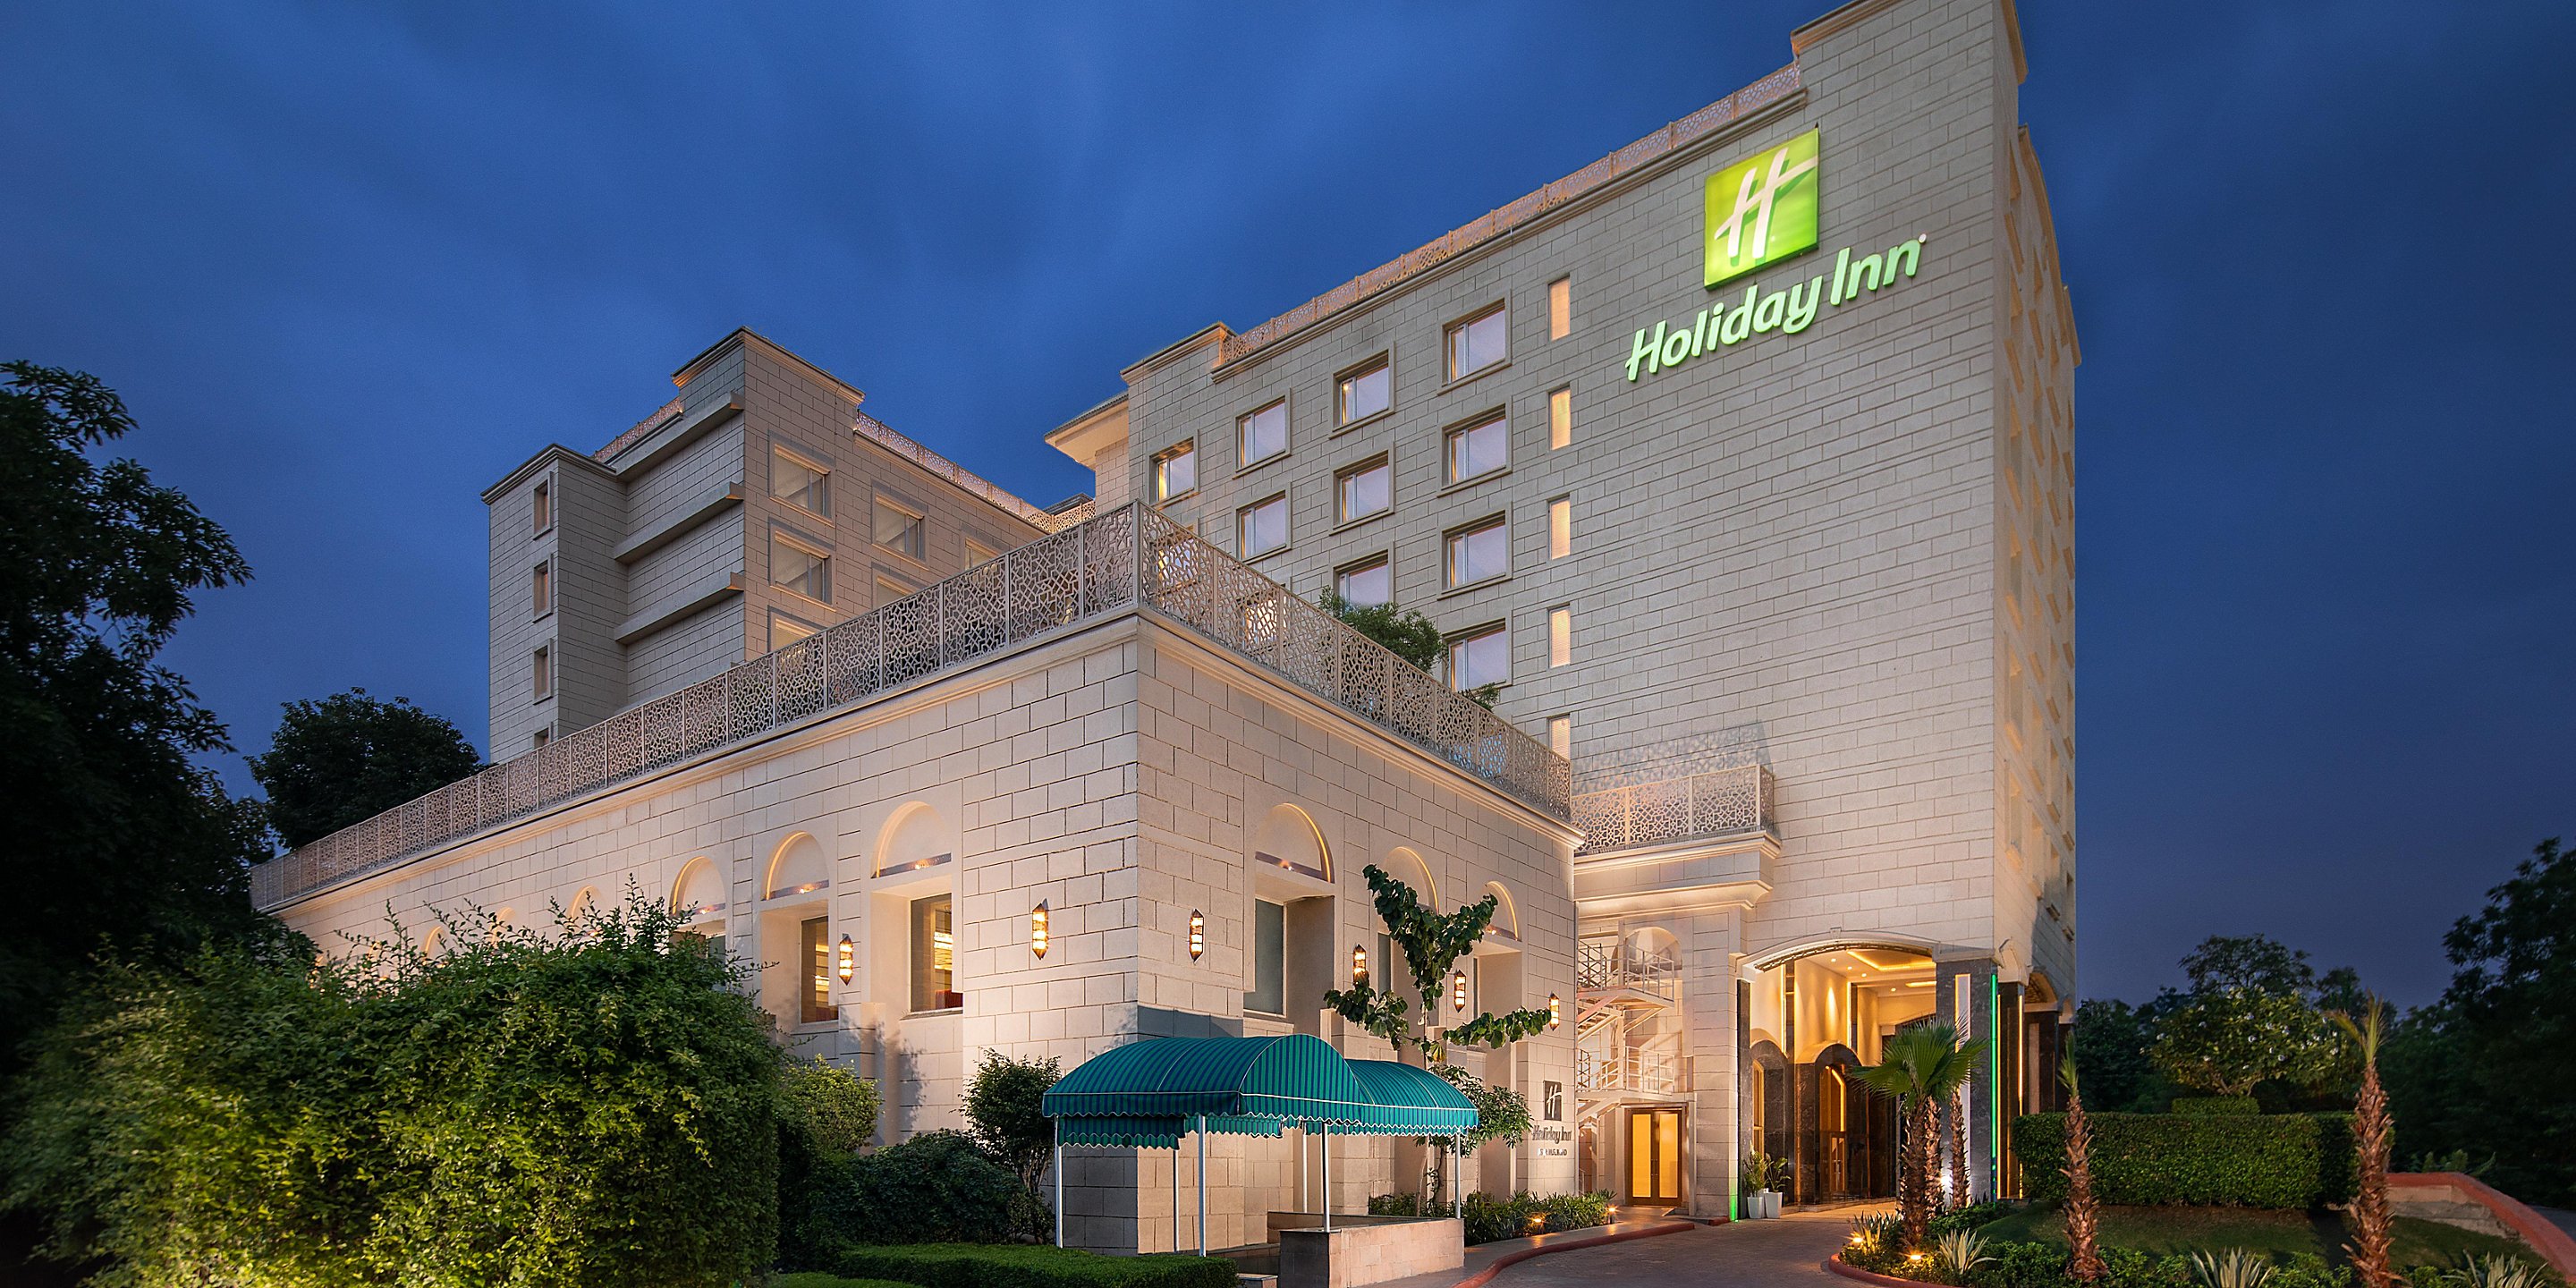 Holiday Inn Agra MG Road - Hotel Exterior Night View